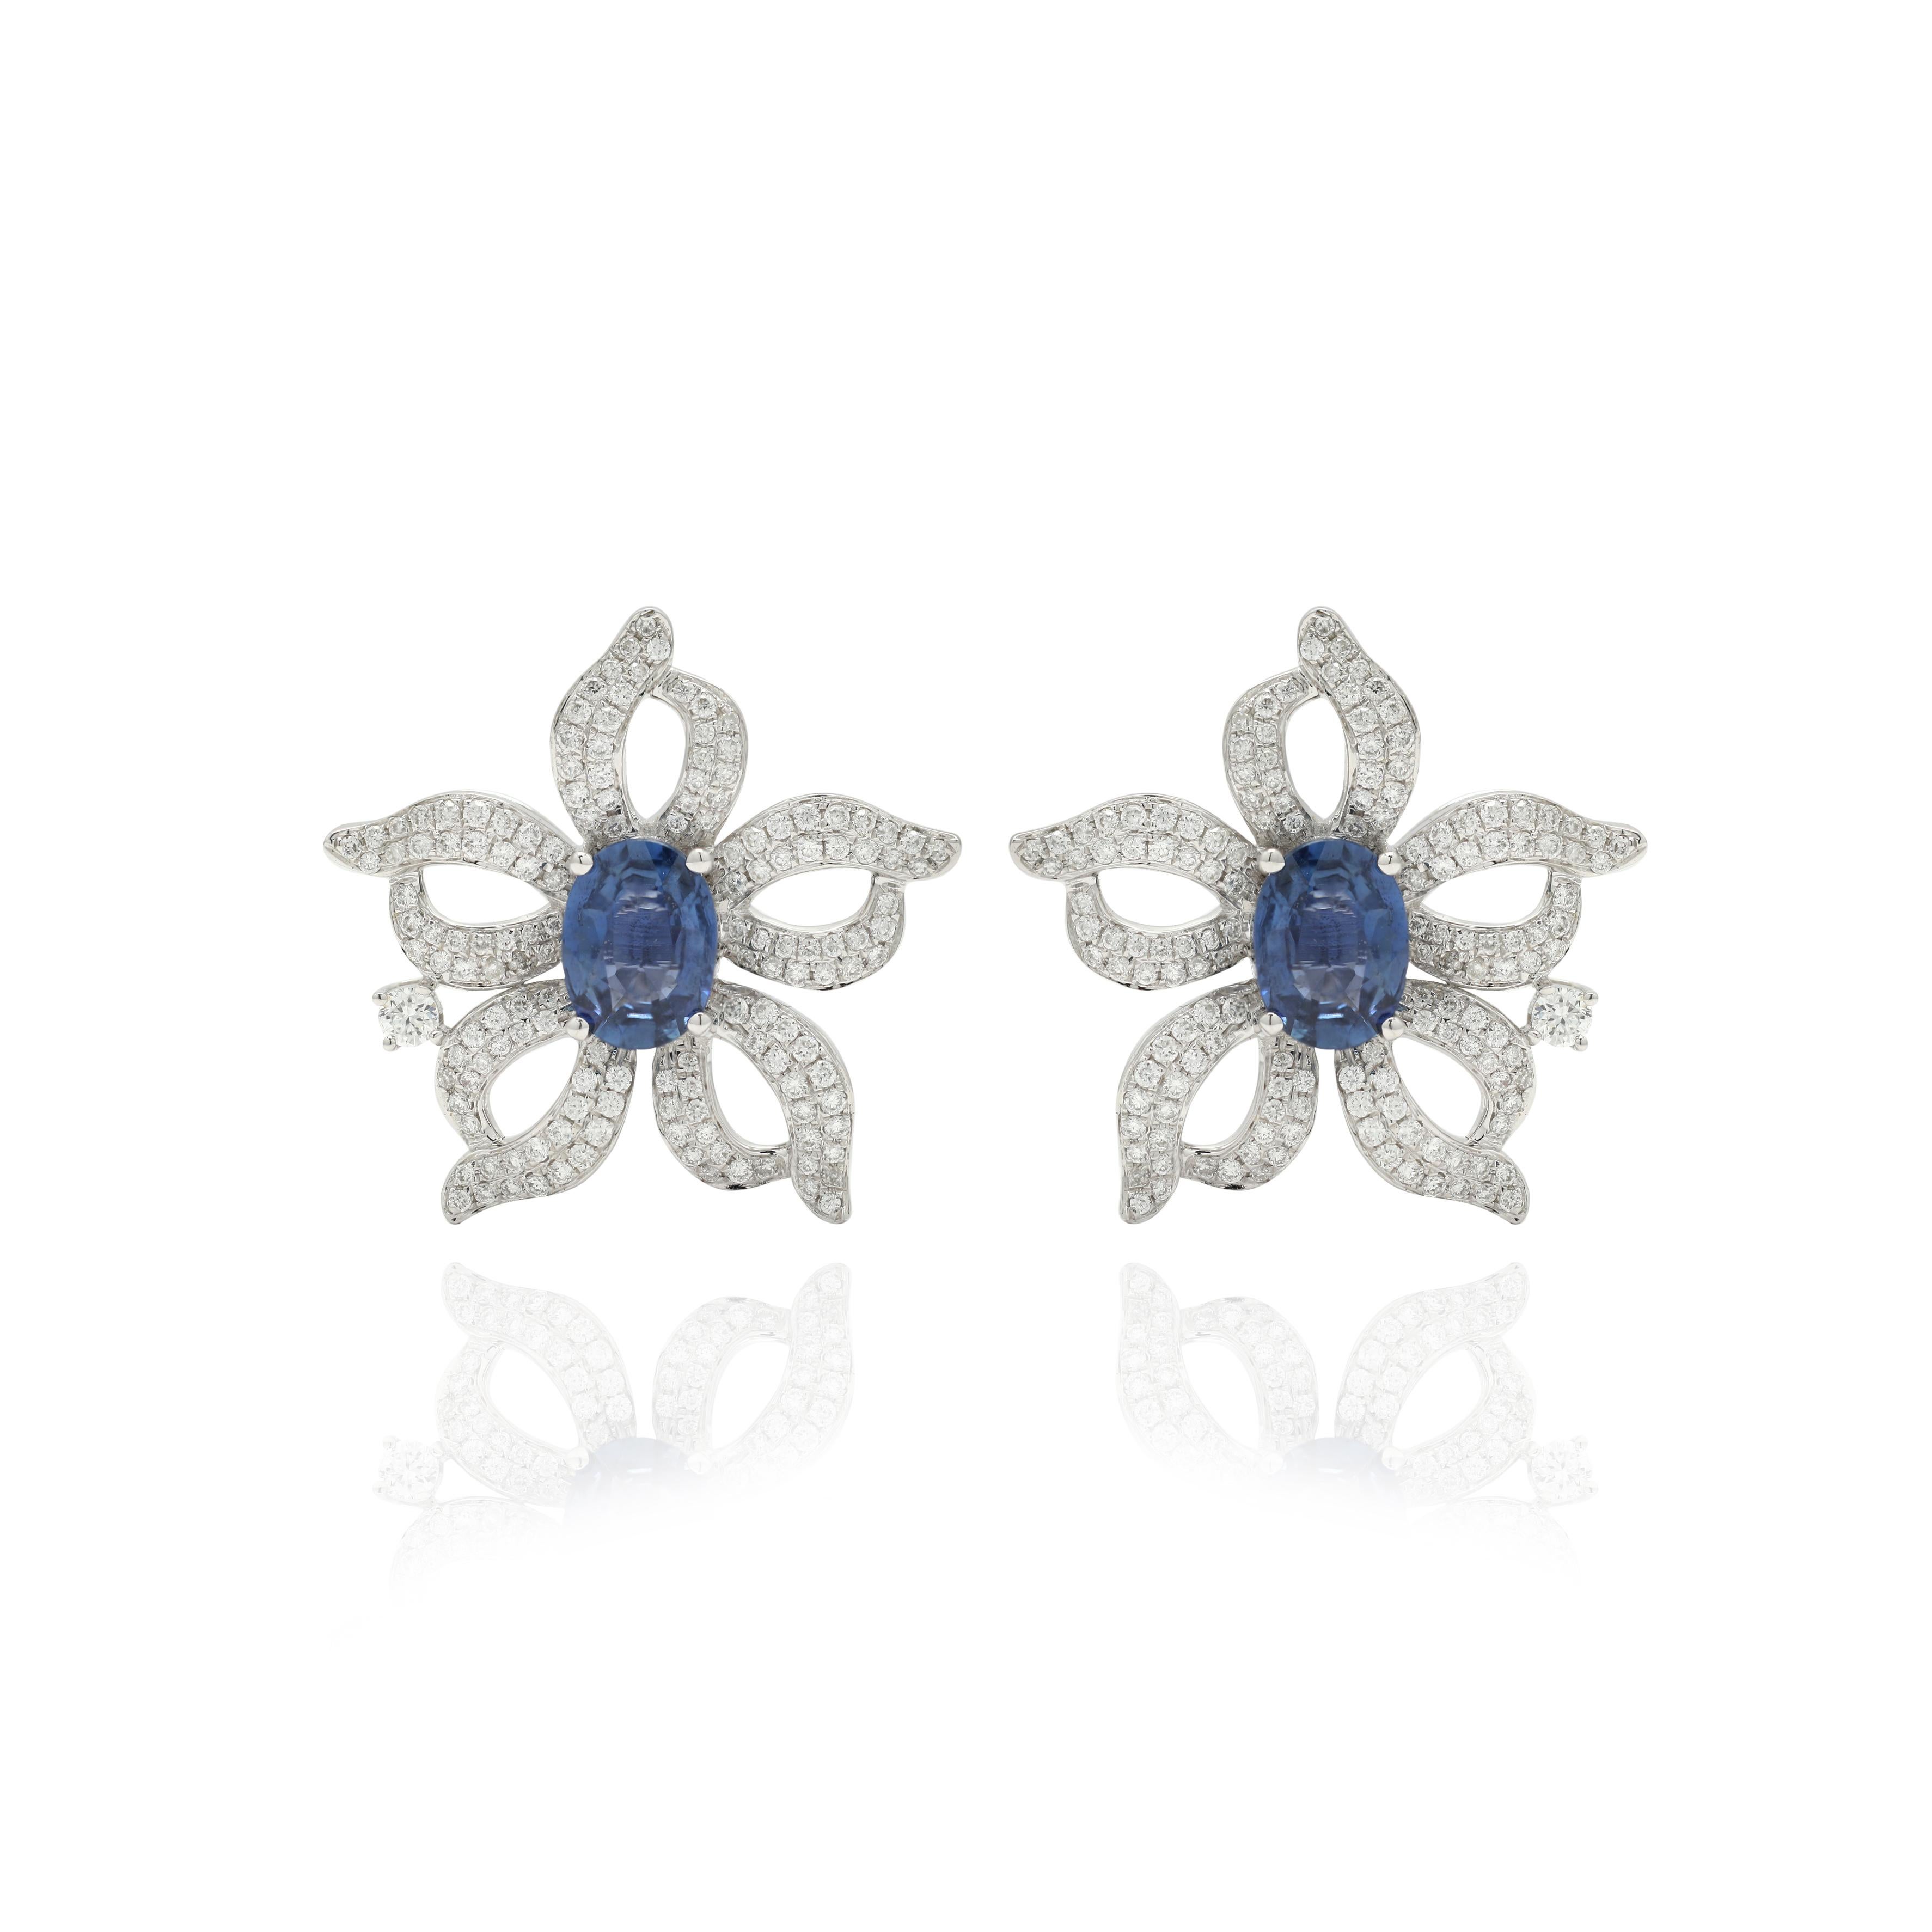 Studs create a subtle beauty while showcasing the colors of the natural precious gemstones and illuminating diamonds making a statement.
Floral blue sapphire with diamonds stud earrings in 14K gold. Embrace your look with these stunning pair of